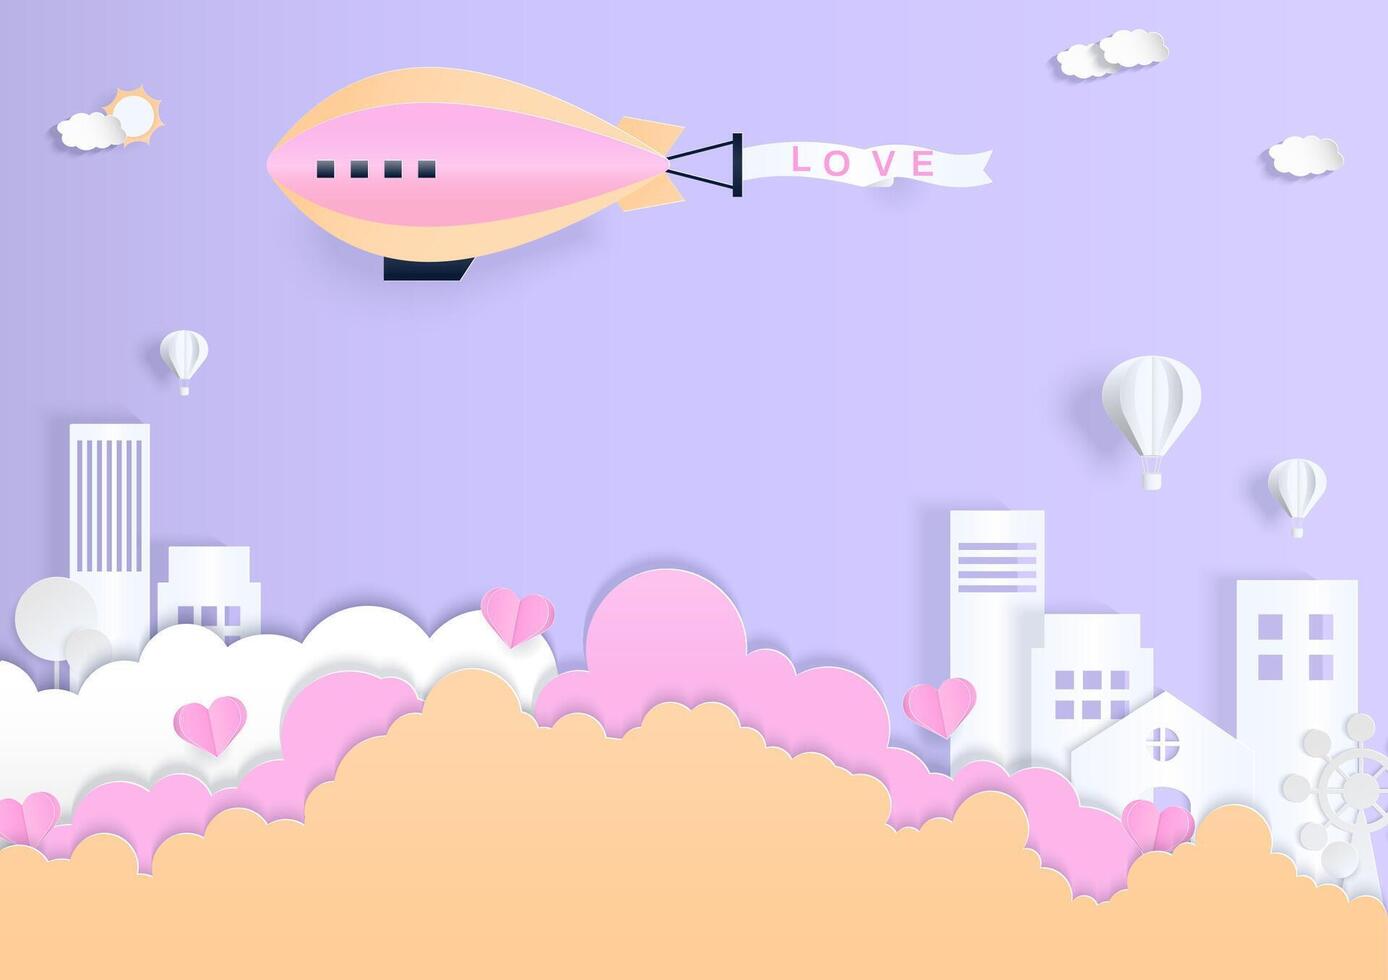 Airship and balloons with cloud background vector